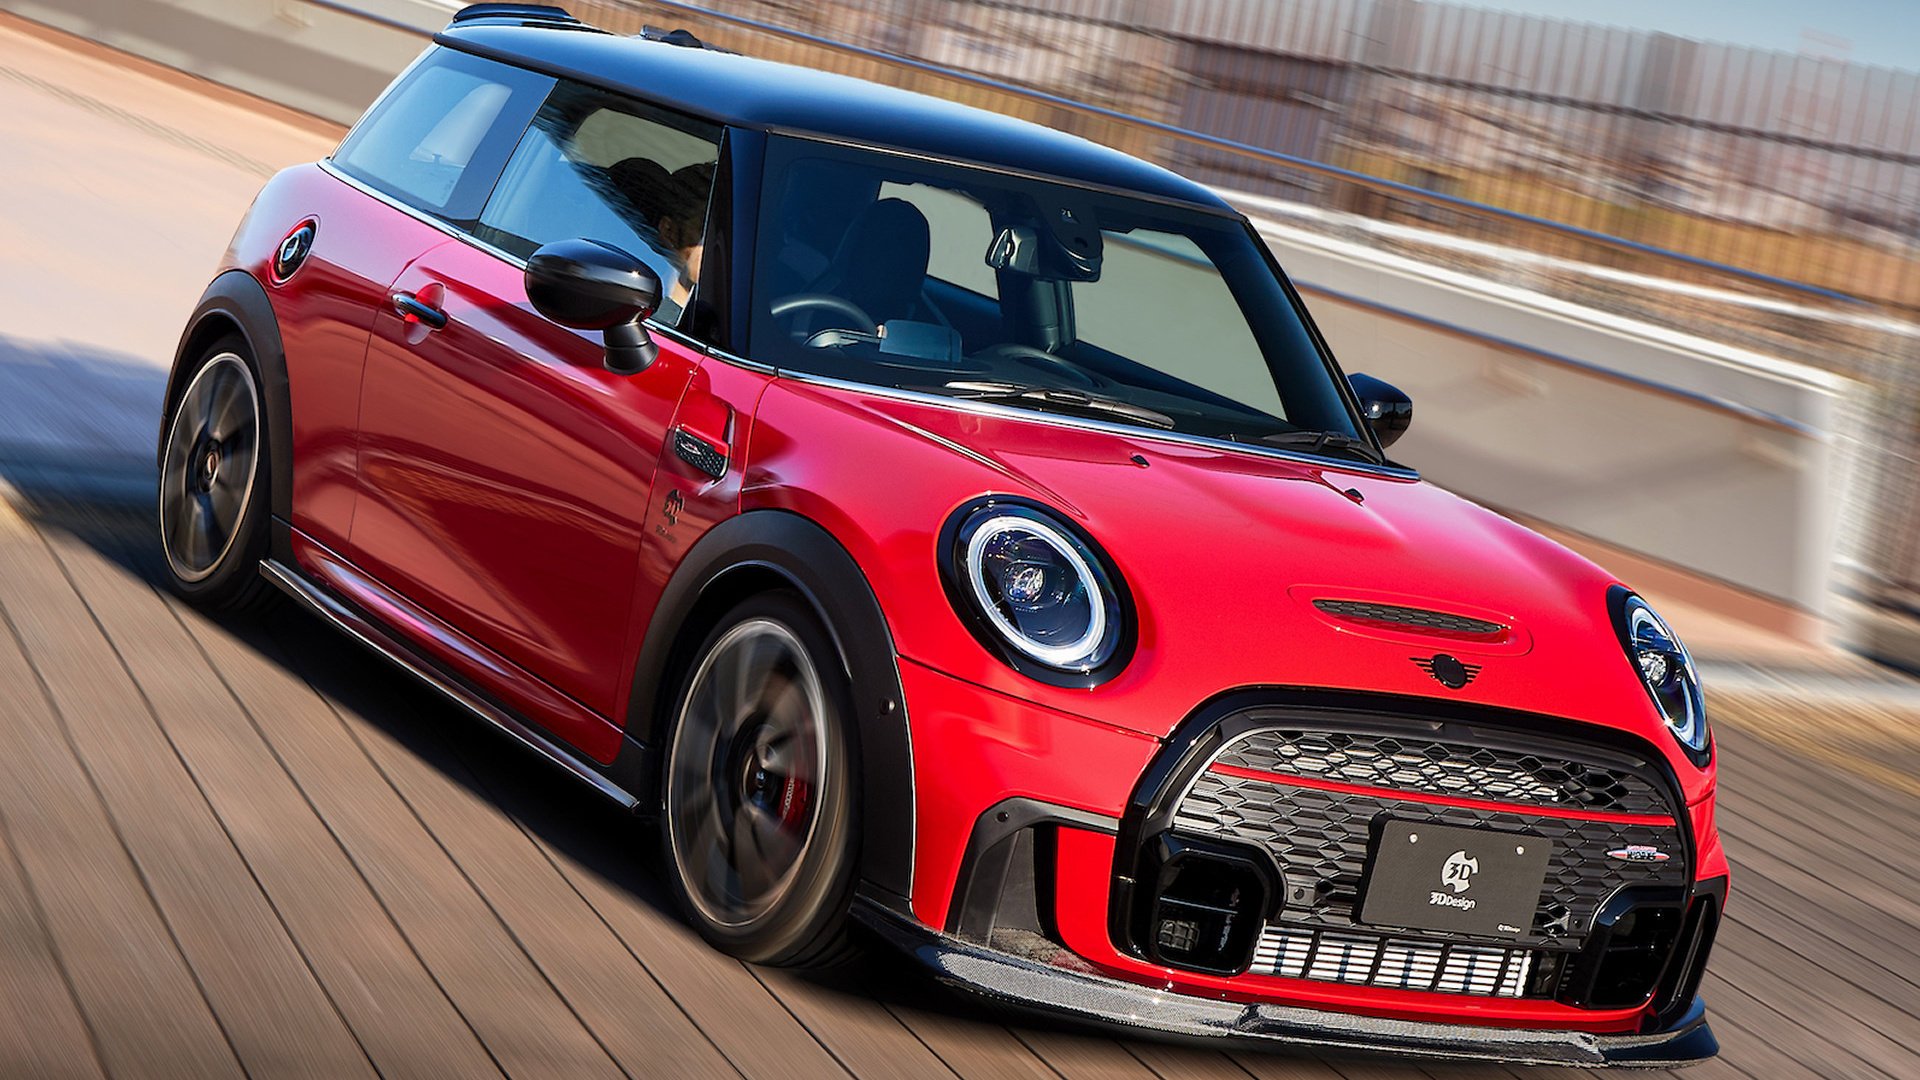 2022 Mini John Cooper Works by 3D Design - Wallpapers and HD Images ...